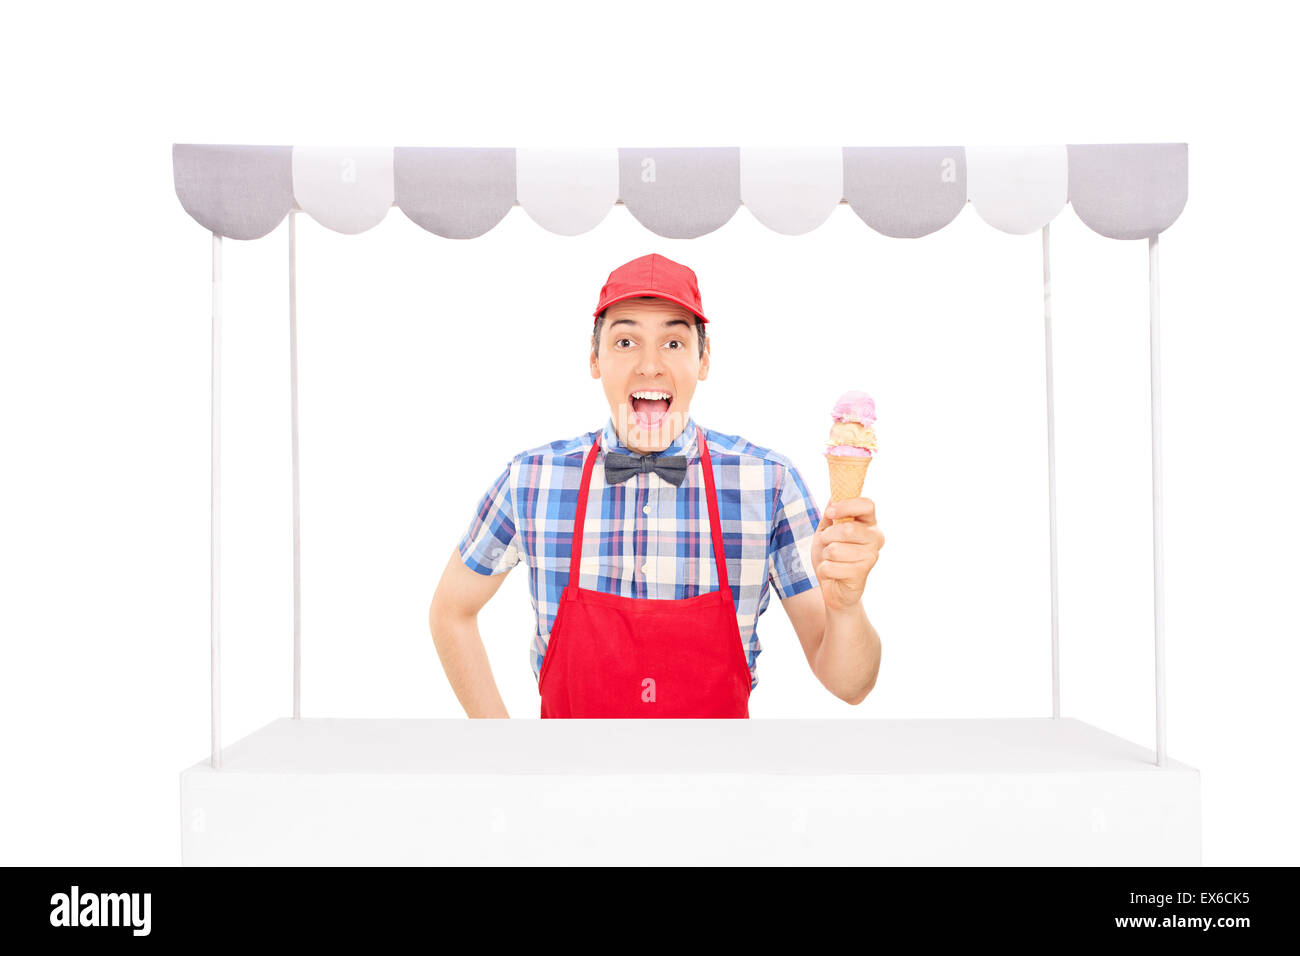 Excited young vendor with a red cap and apron holding an ice cream cone behind an ice cream stand isolated on white background Stock Photo